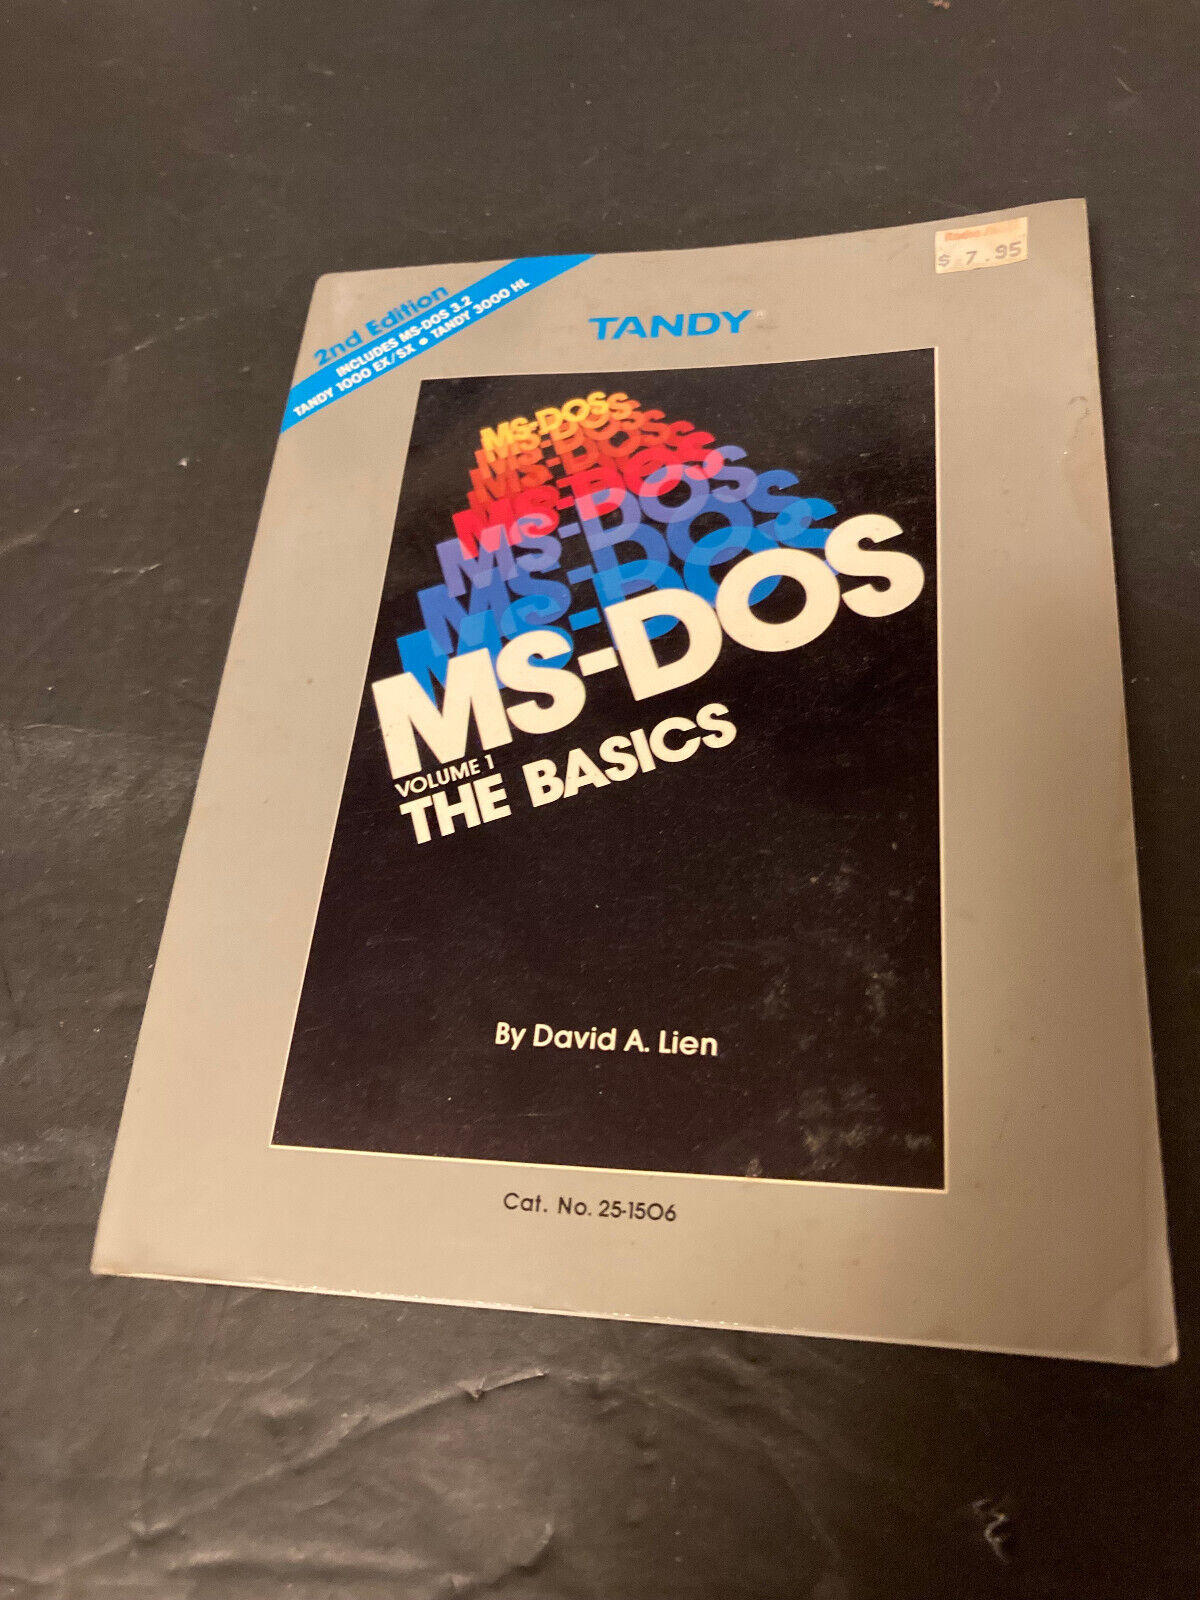 Vintage Tandy MS-DOS The Basics 2nd Edition by David A Lien Book Radio Shack